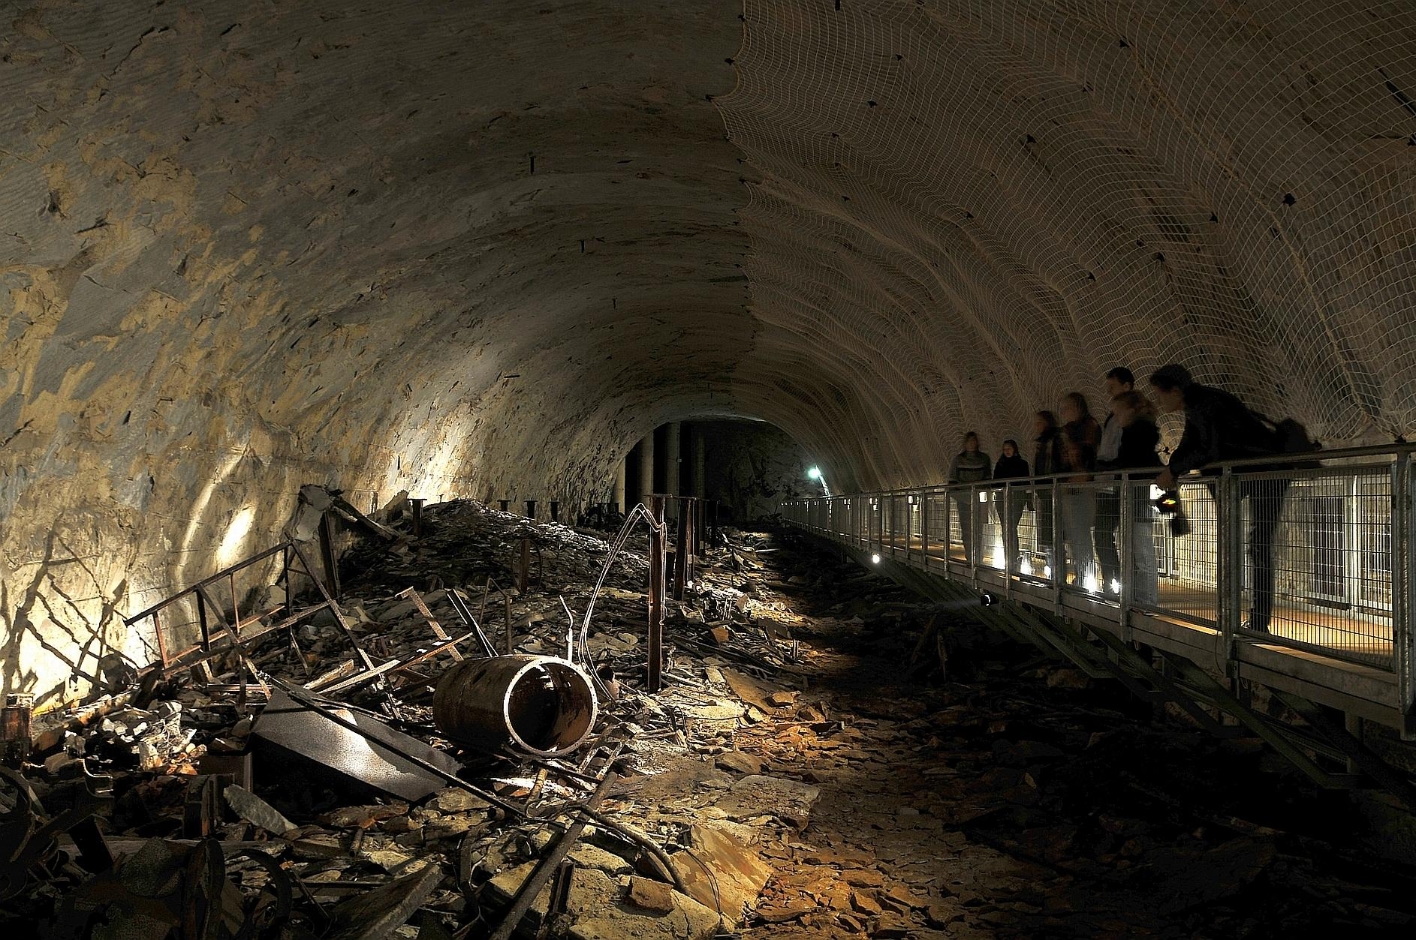 Visitors looking at the remains of the V1 flying bombs that used to be assembled here in one of the transverse tunnels of the Mittelbau-Dora concentration camp